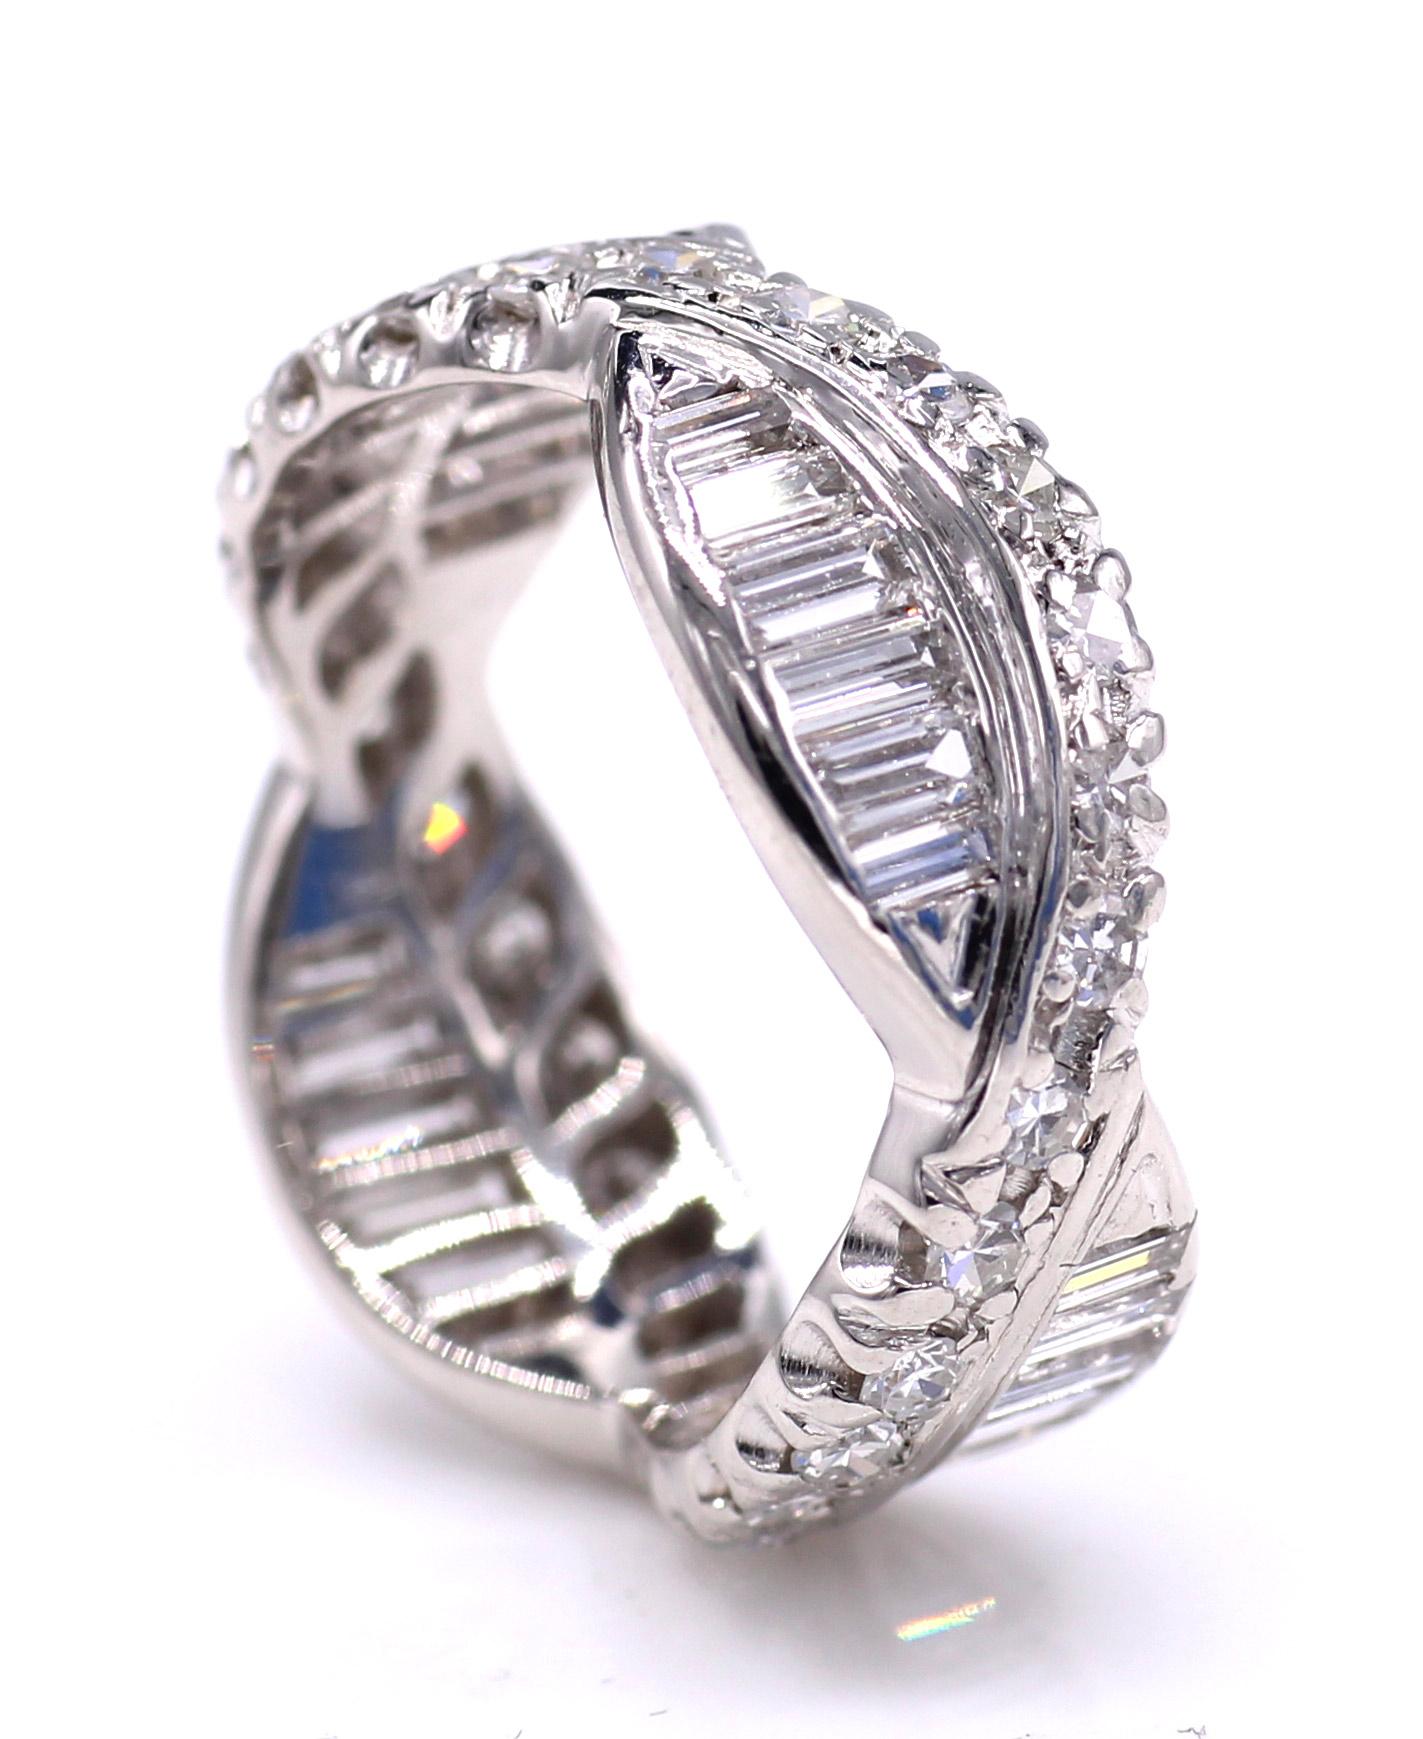 This unique Art Deco platinum diamond eternity band has been beautifully designed with a curving band of bright white round diamonds intersected with sections of equally white lively baguette cut diamonds. Masterfully handcrafted the perfectly